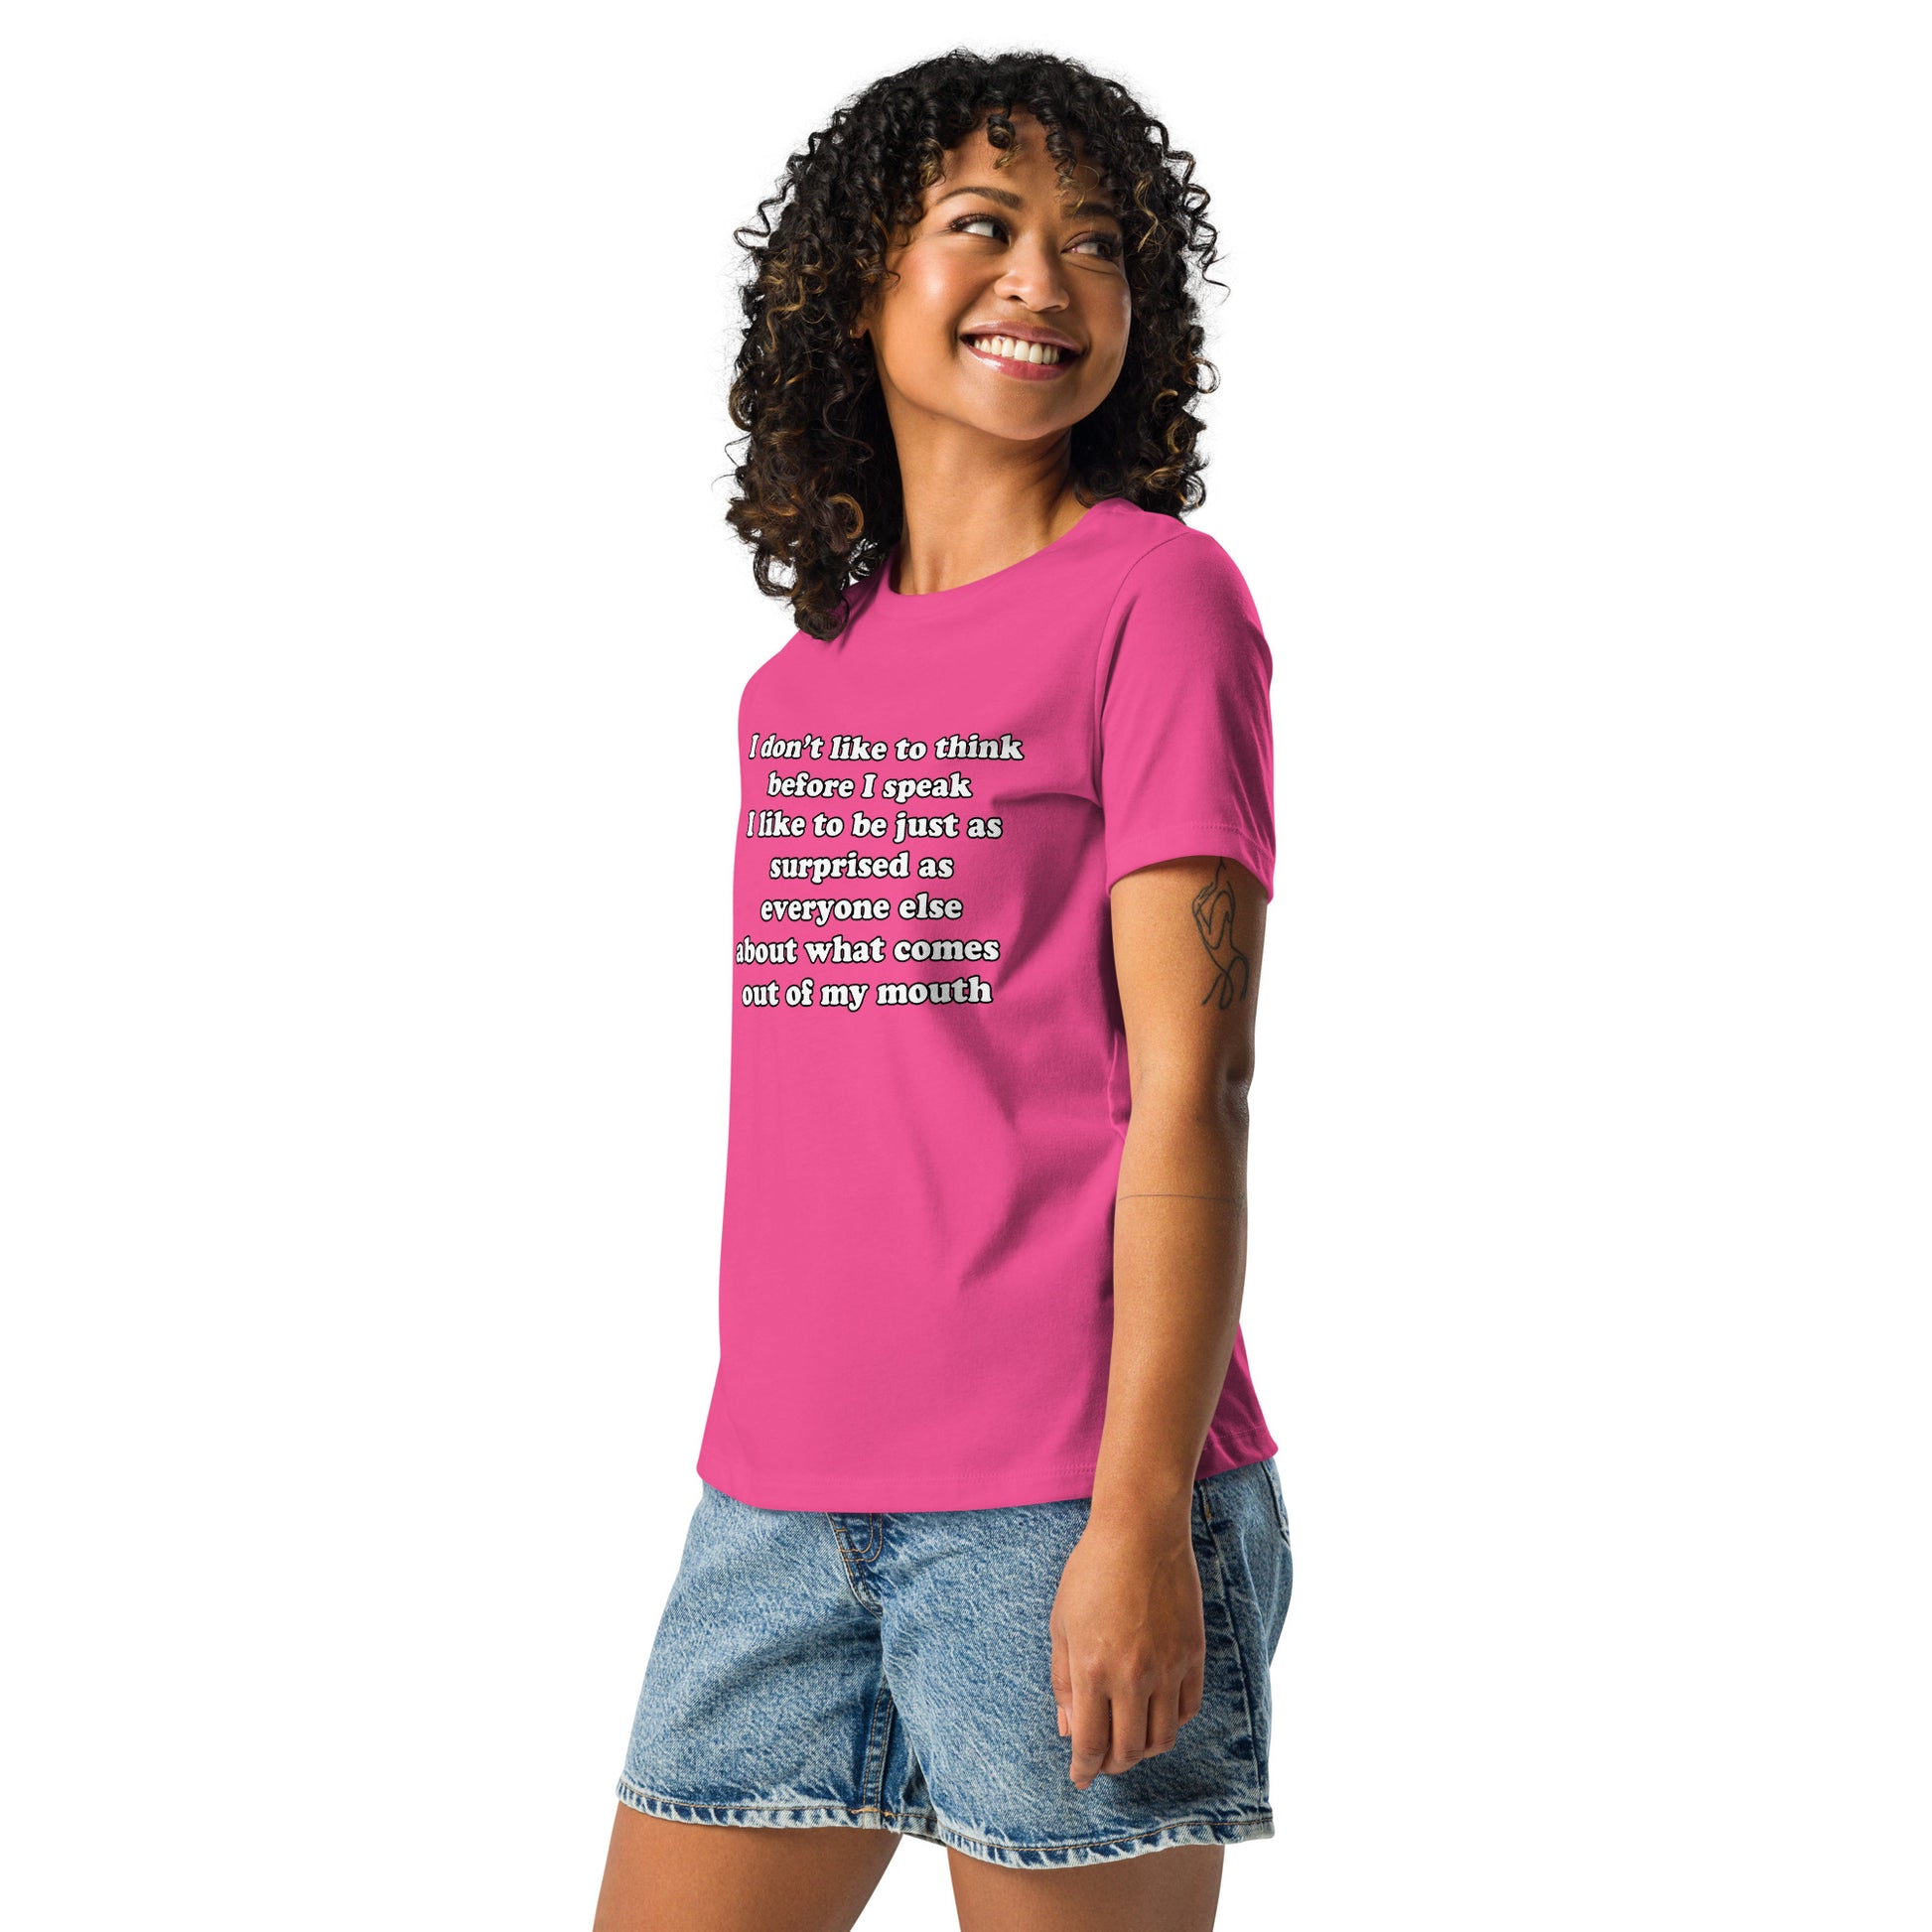 Woman with berry t-shirt with text “I don't think before I speak Just as serprised as everyone about what comes out of my mouth"